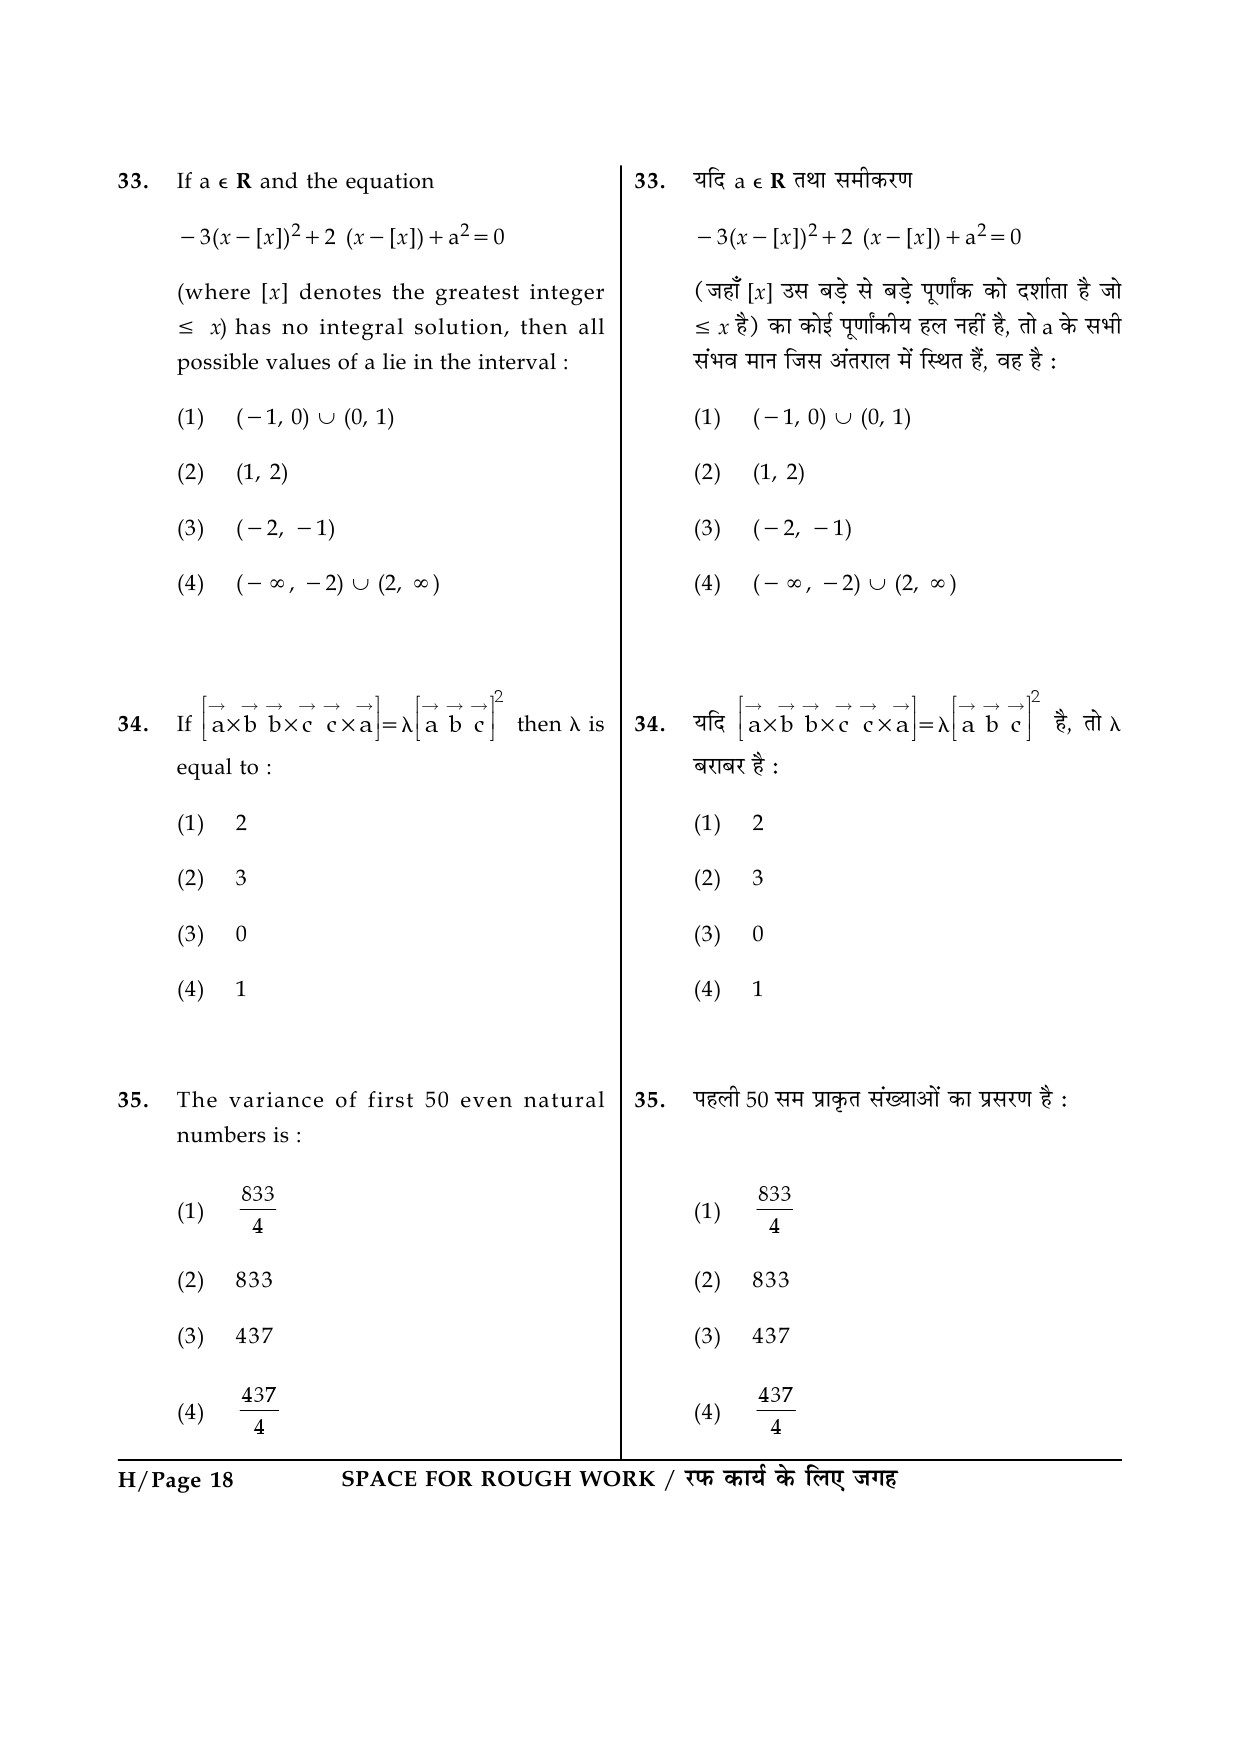 JEE Main Exam Question Paper 2014 Booklet H 18